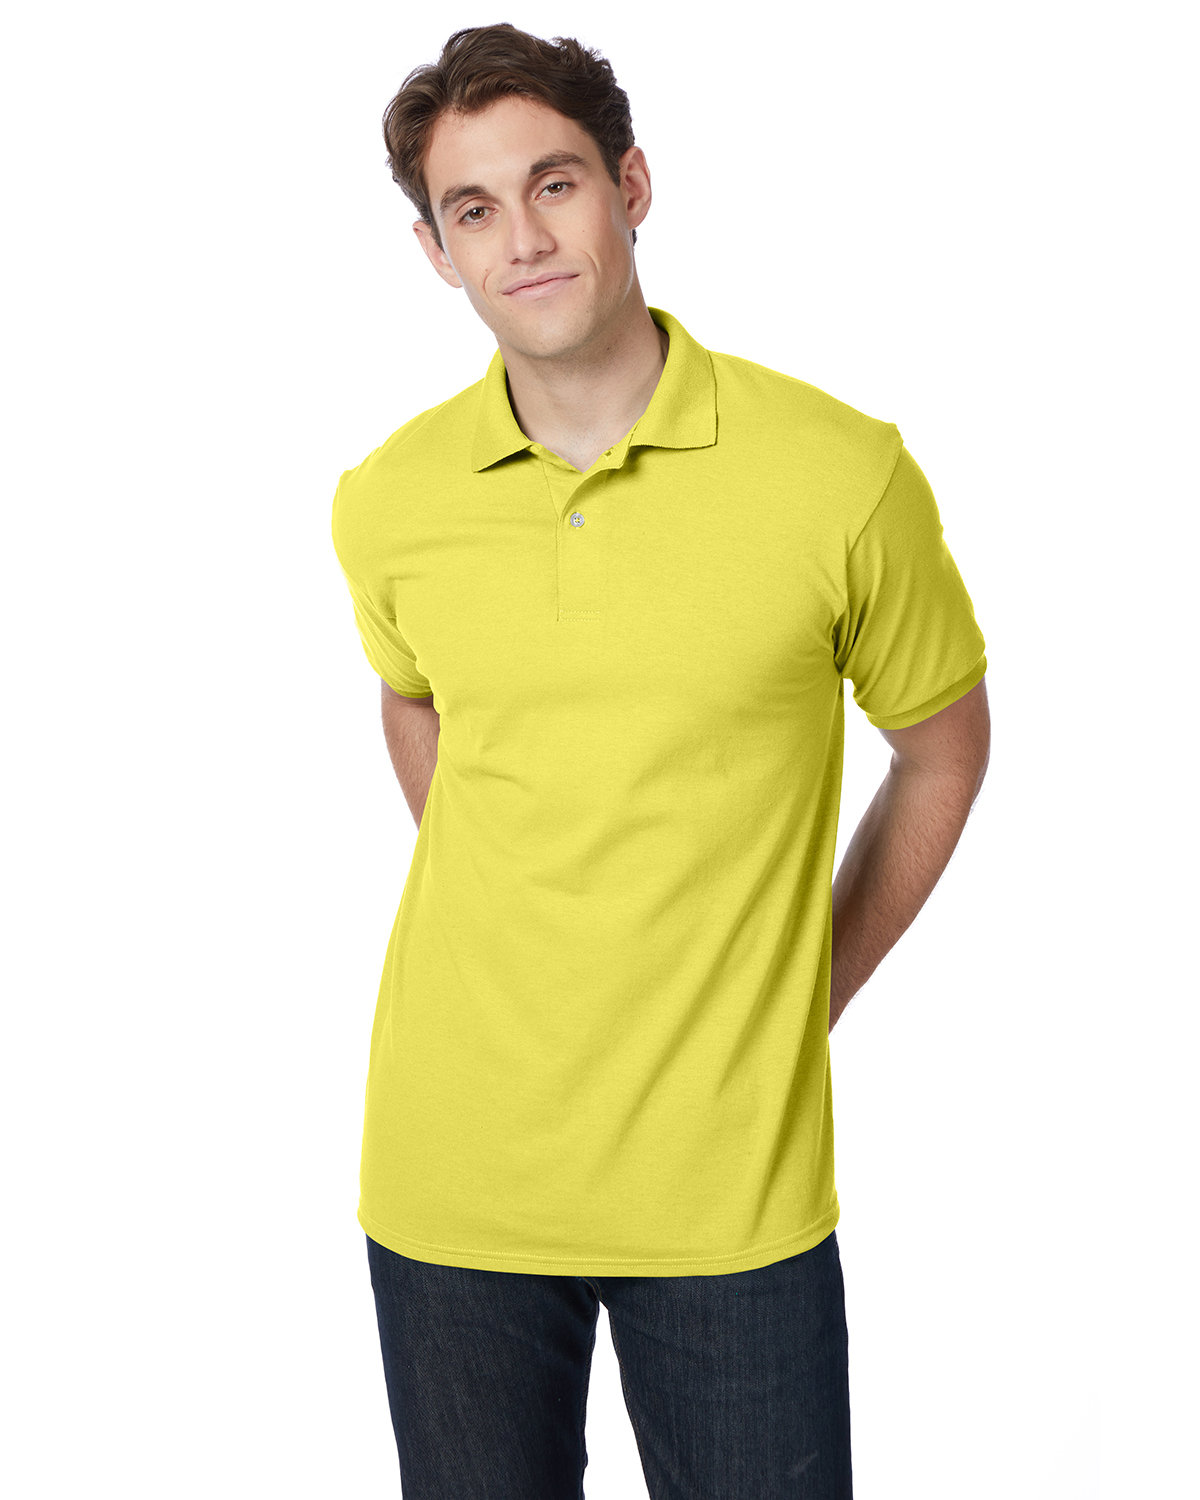 Hanes Adult 50/50 EcoSmart® Jersey Knit Polo YELLOW 